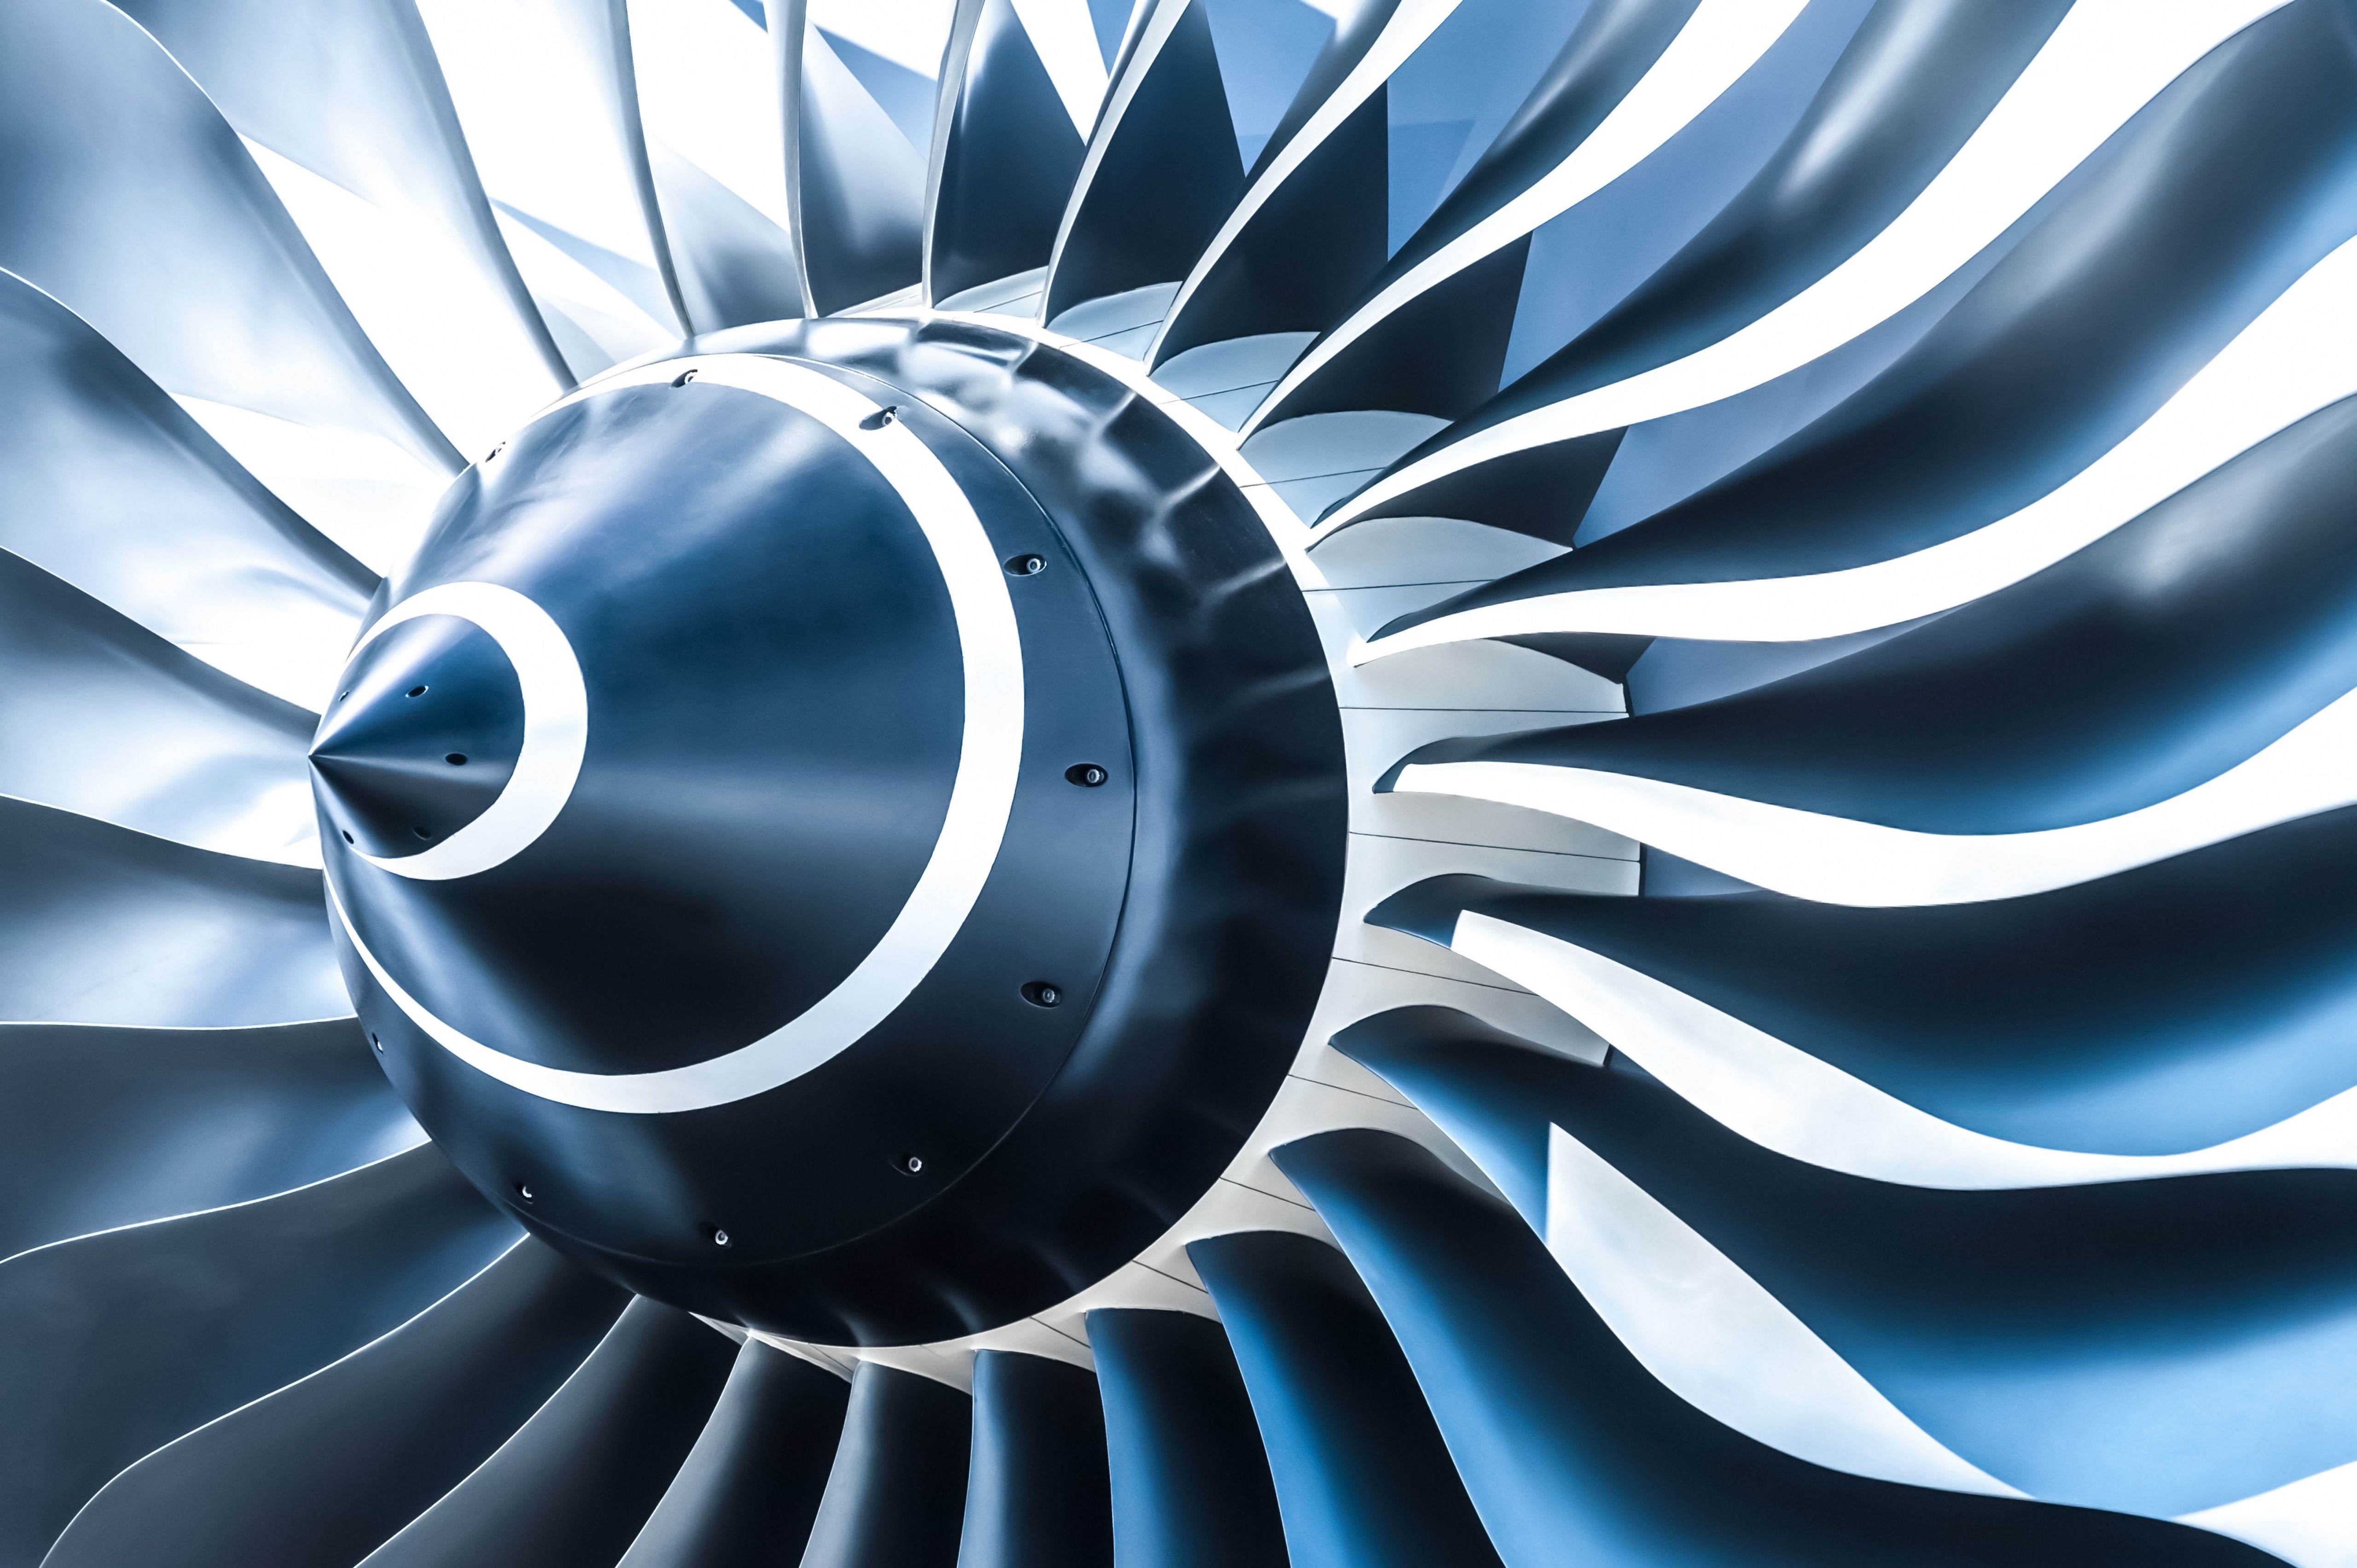 Aircraft Engine Wallpaper High Resolution with High Resolution